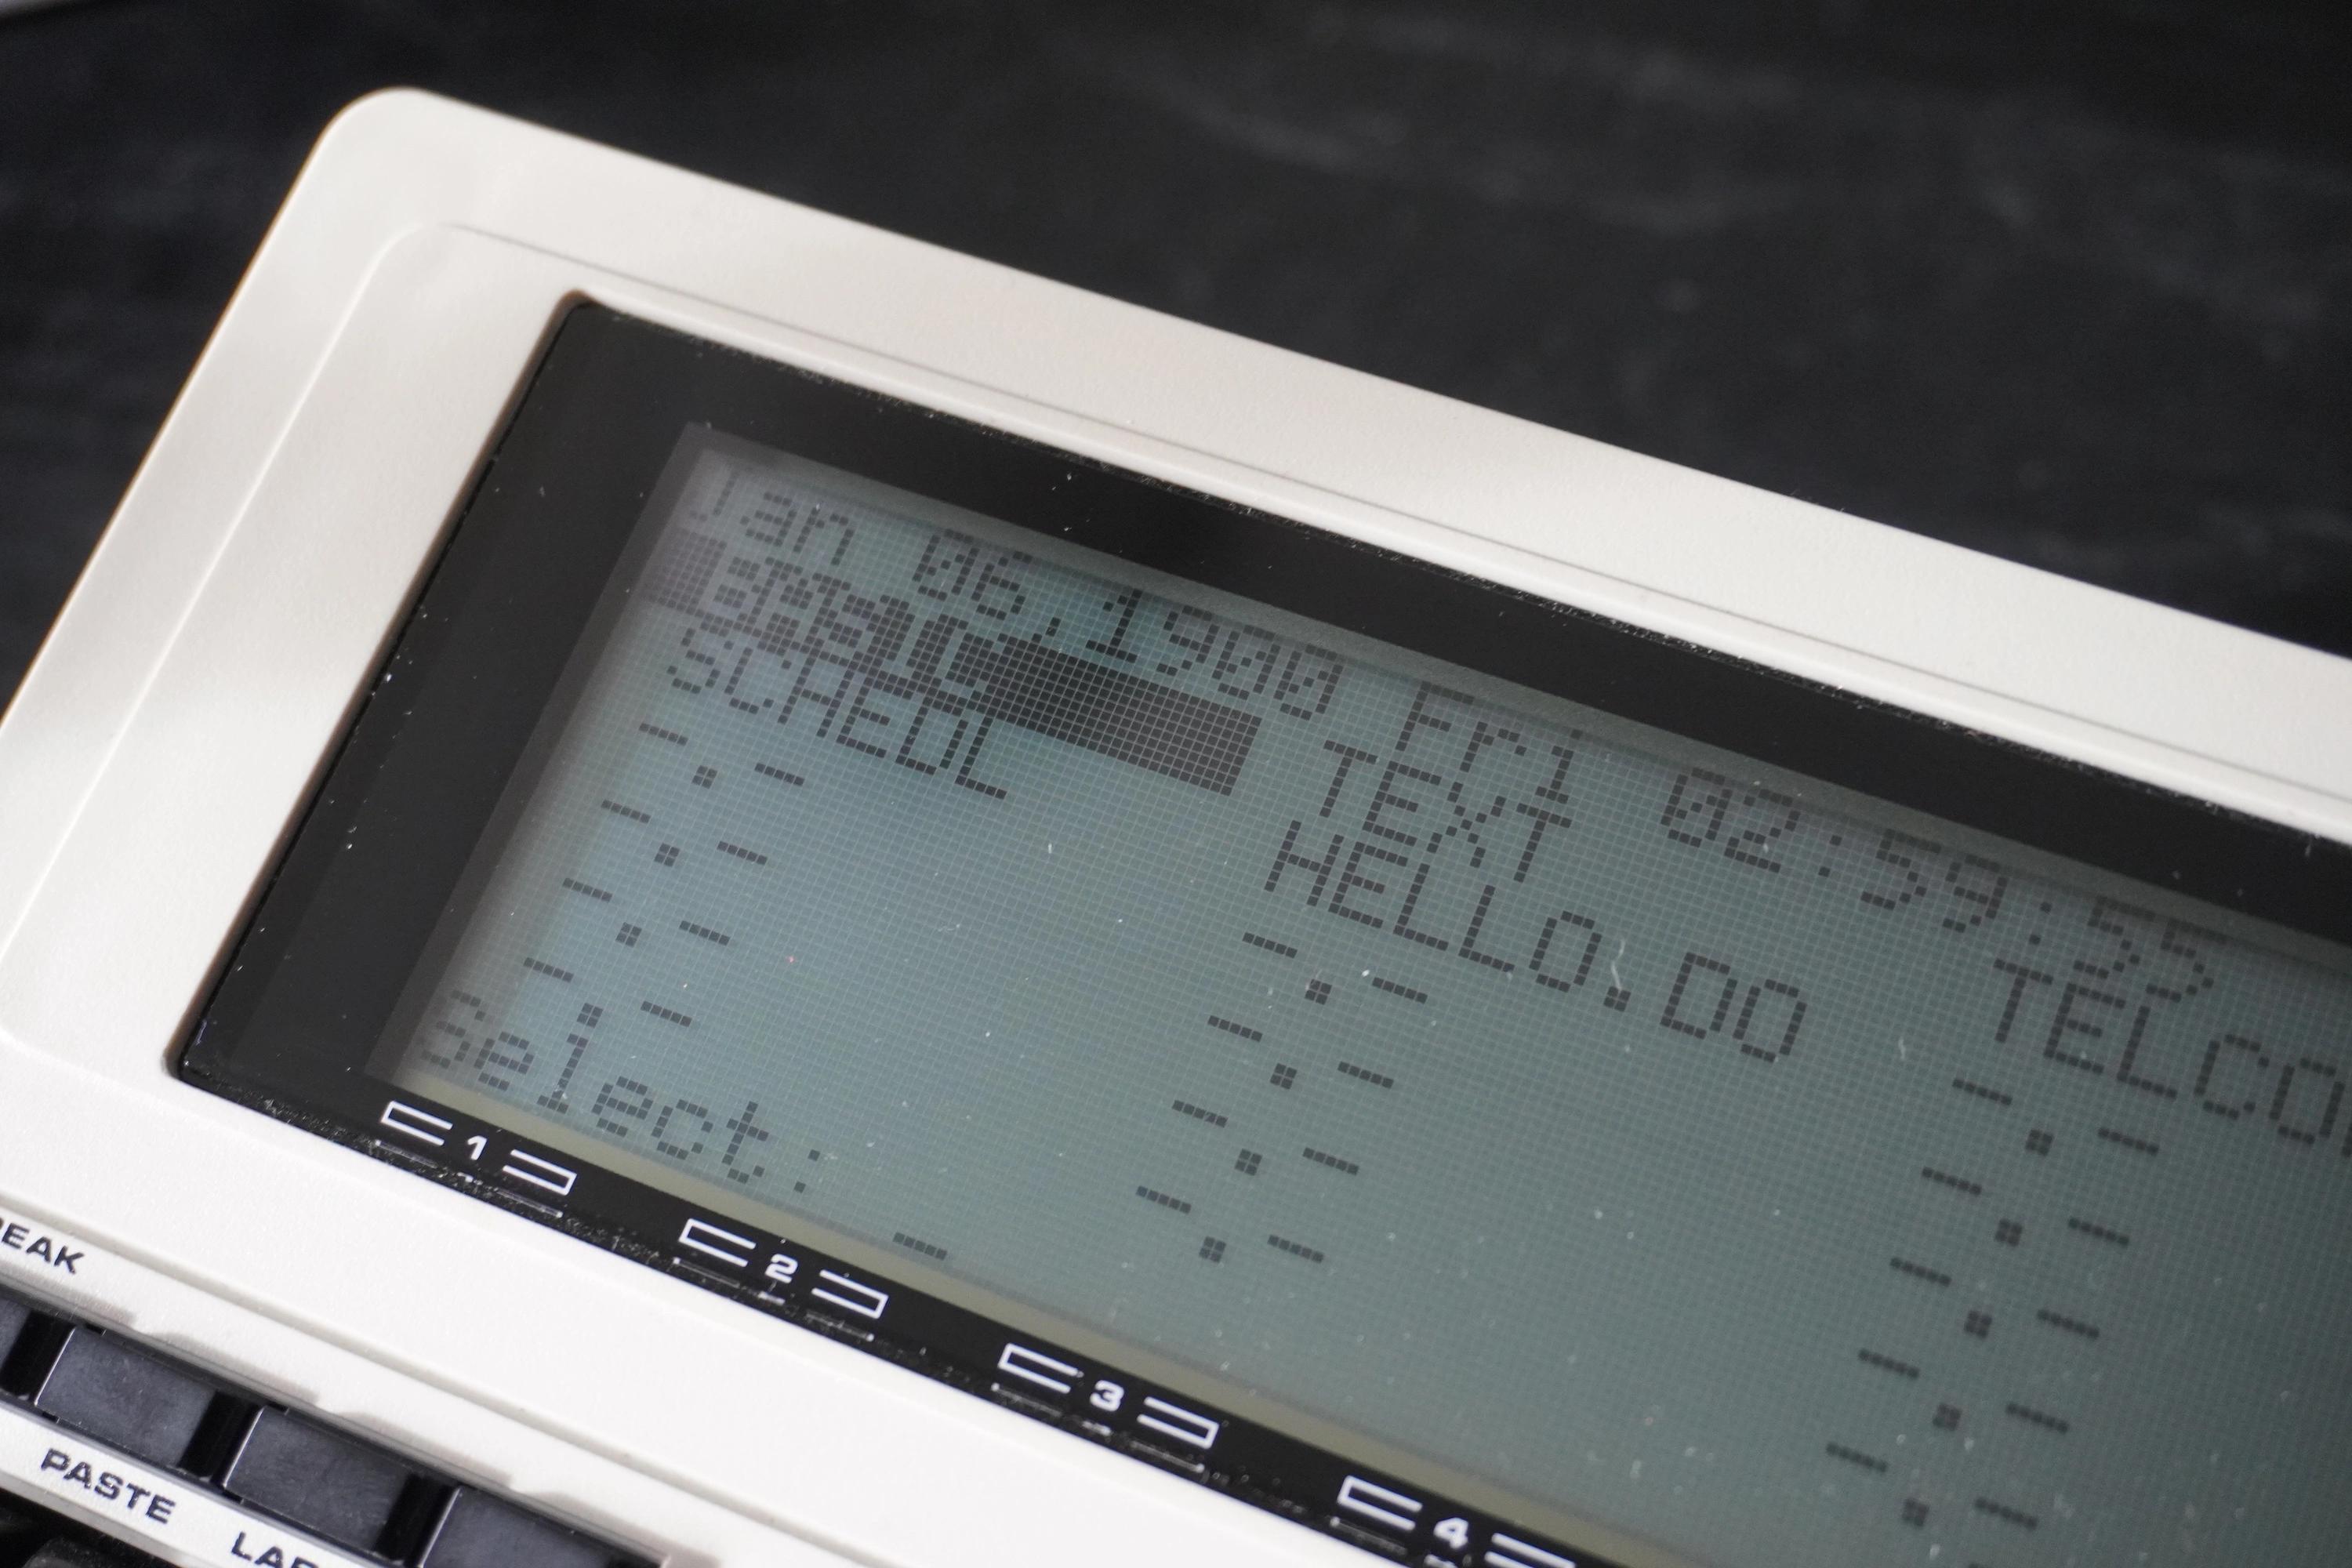 Tandy 102 screen showing its applications in a grid layout. The BASIC application is currently selected